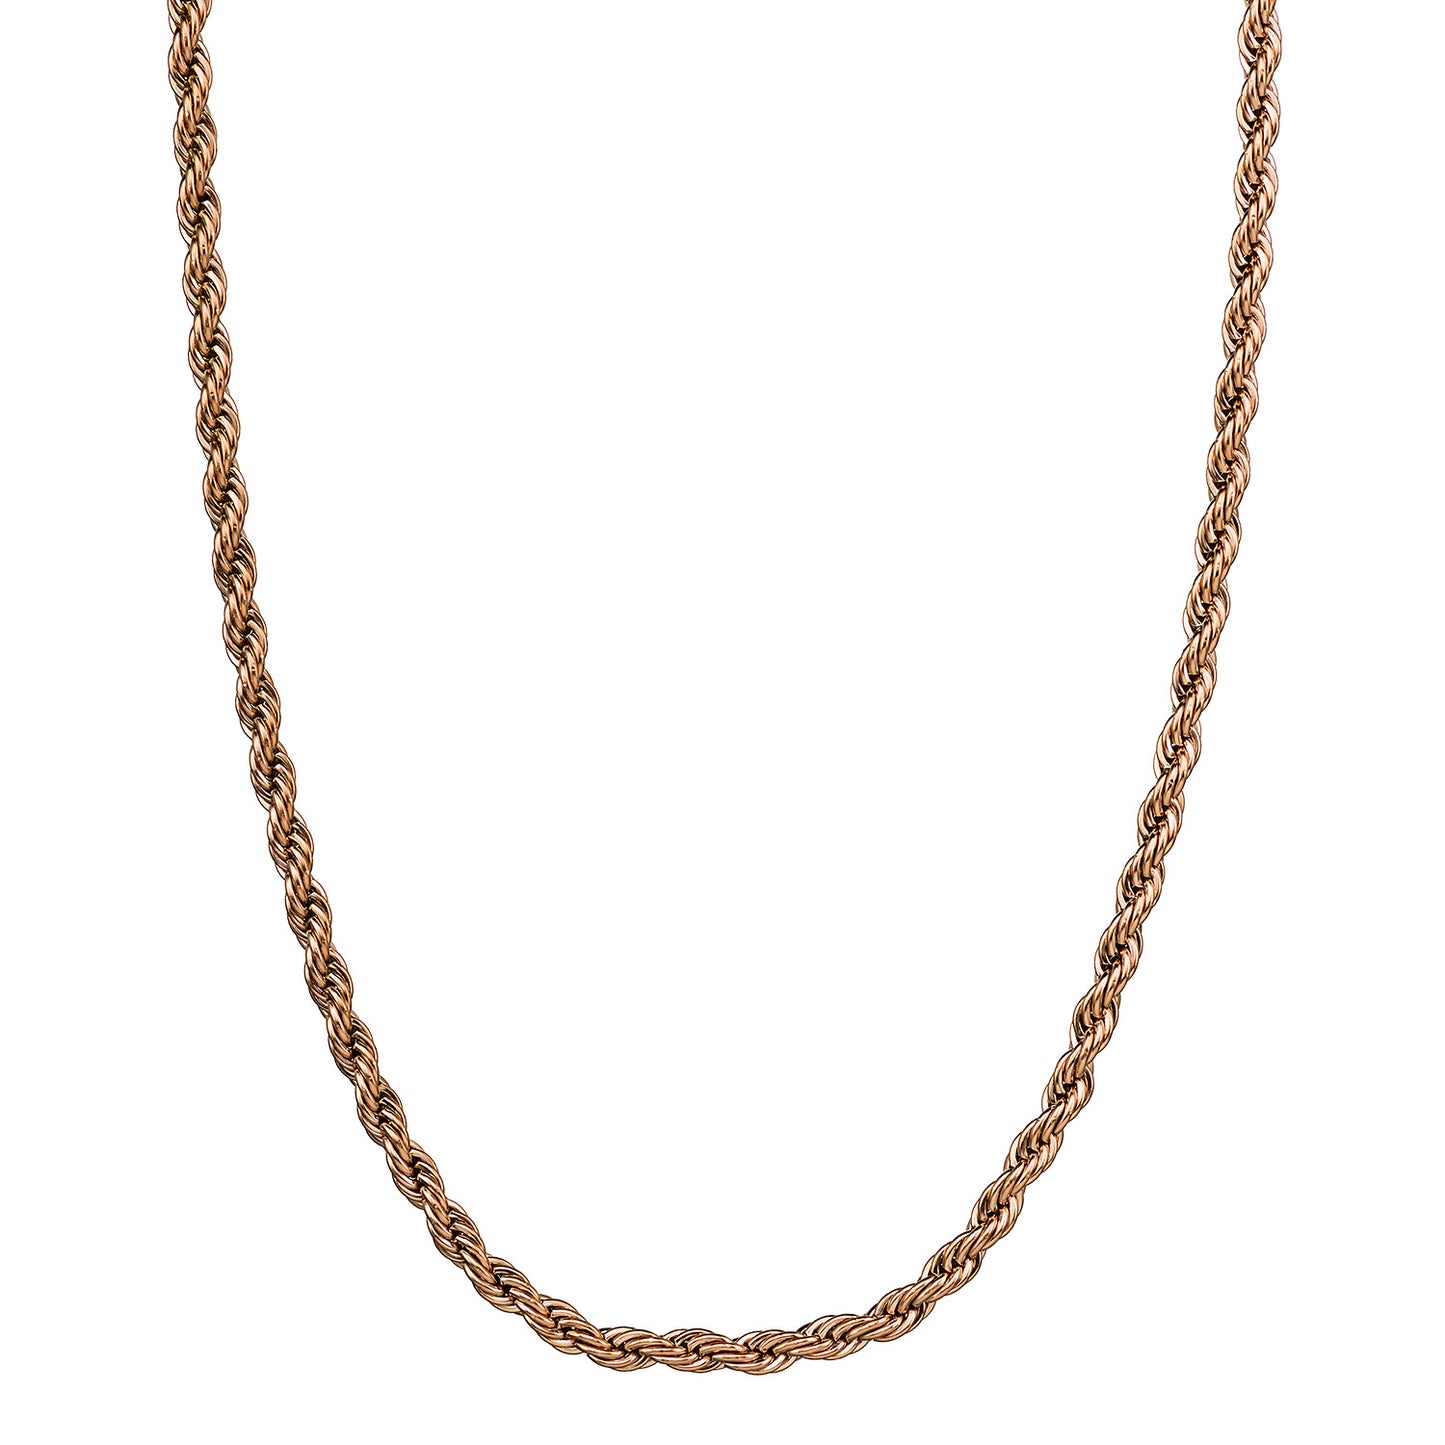 Chain Rope 5mm Rosegold